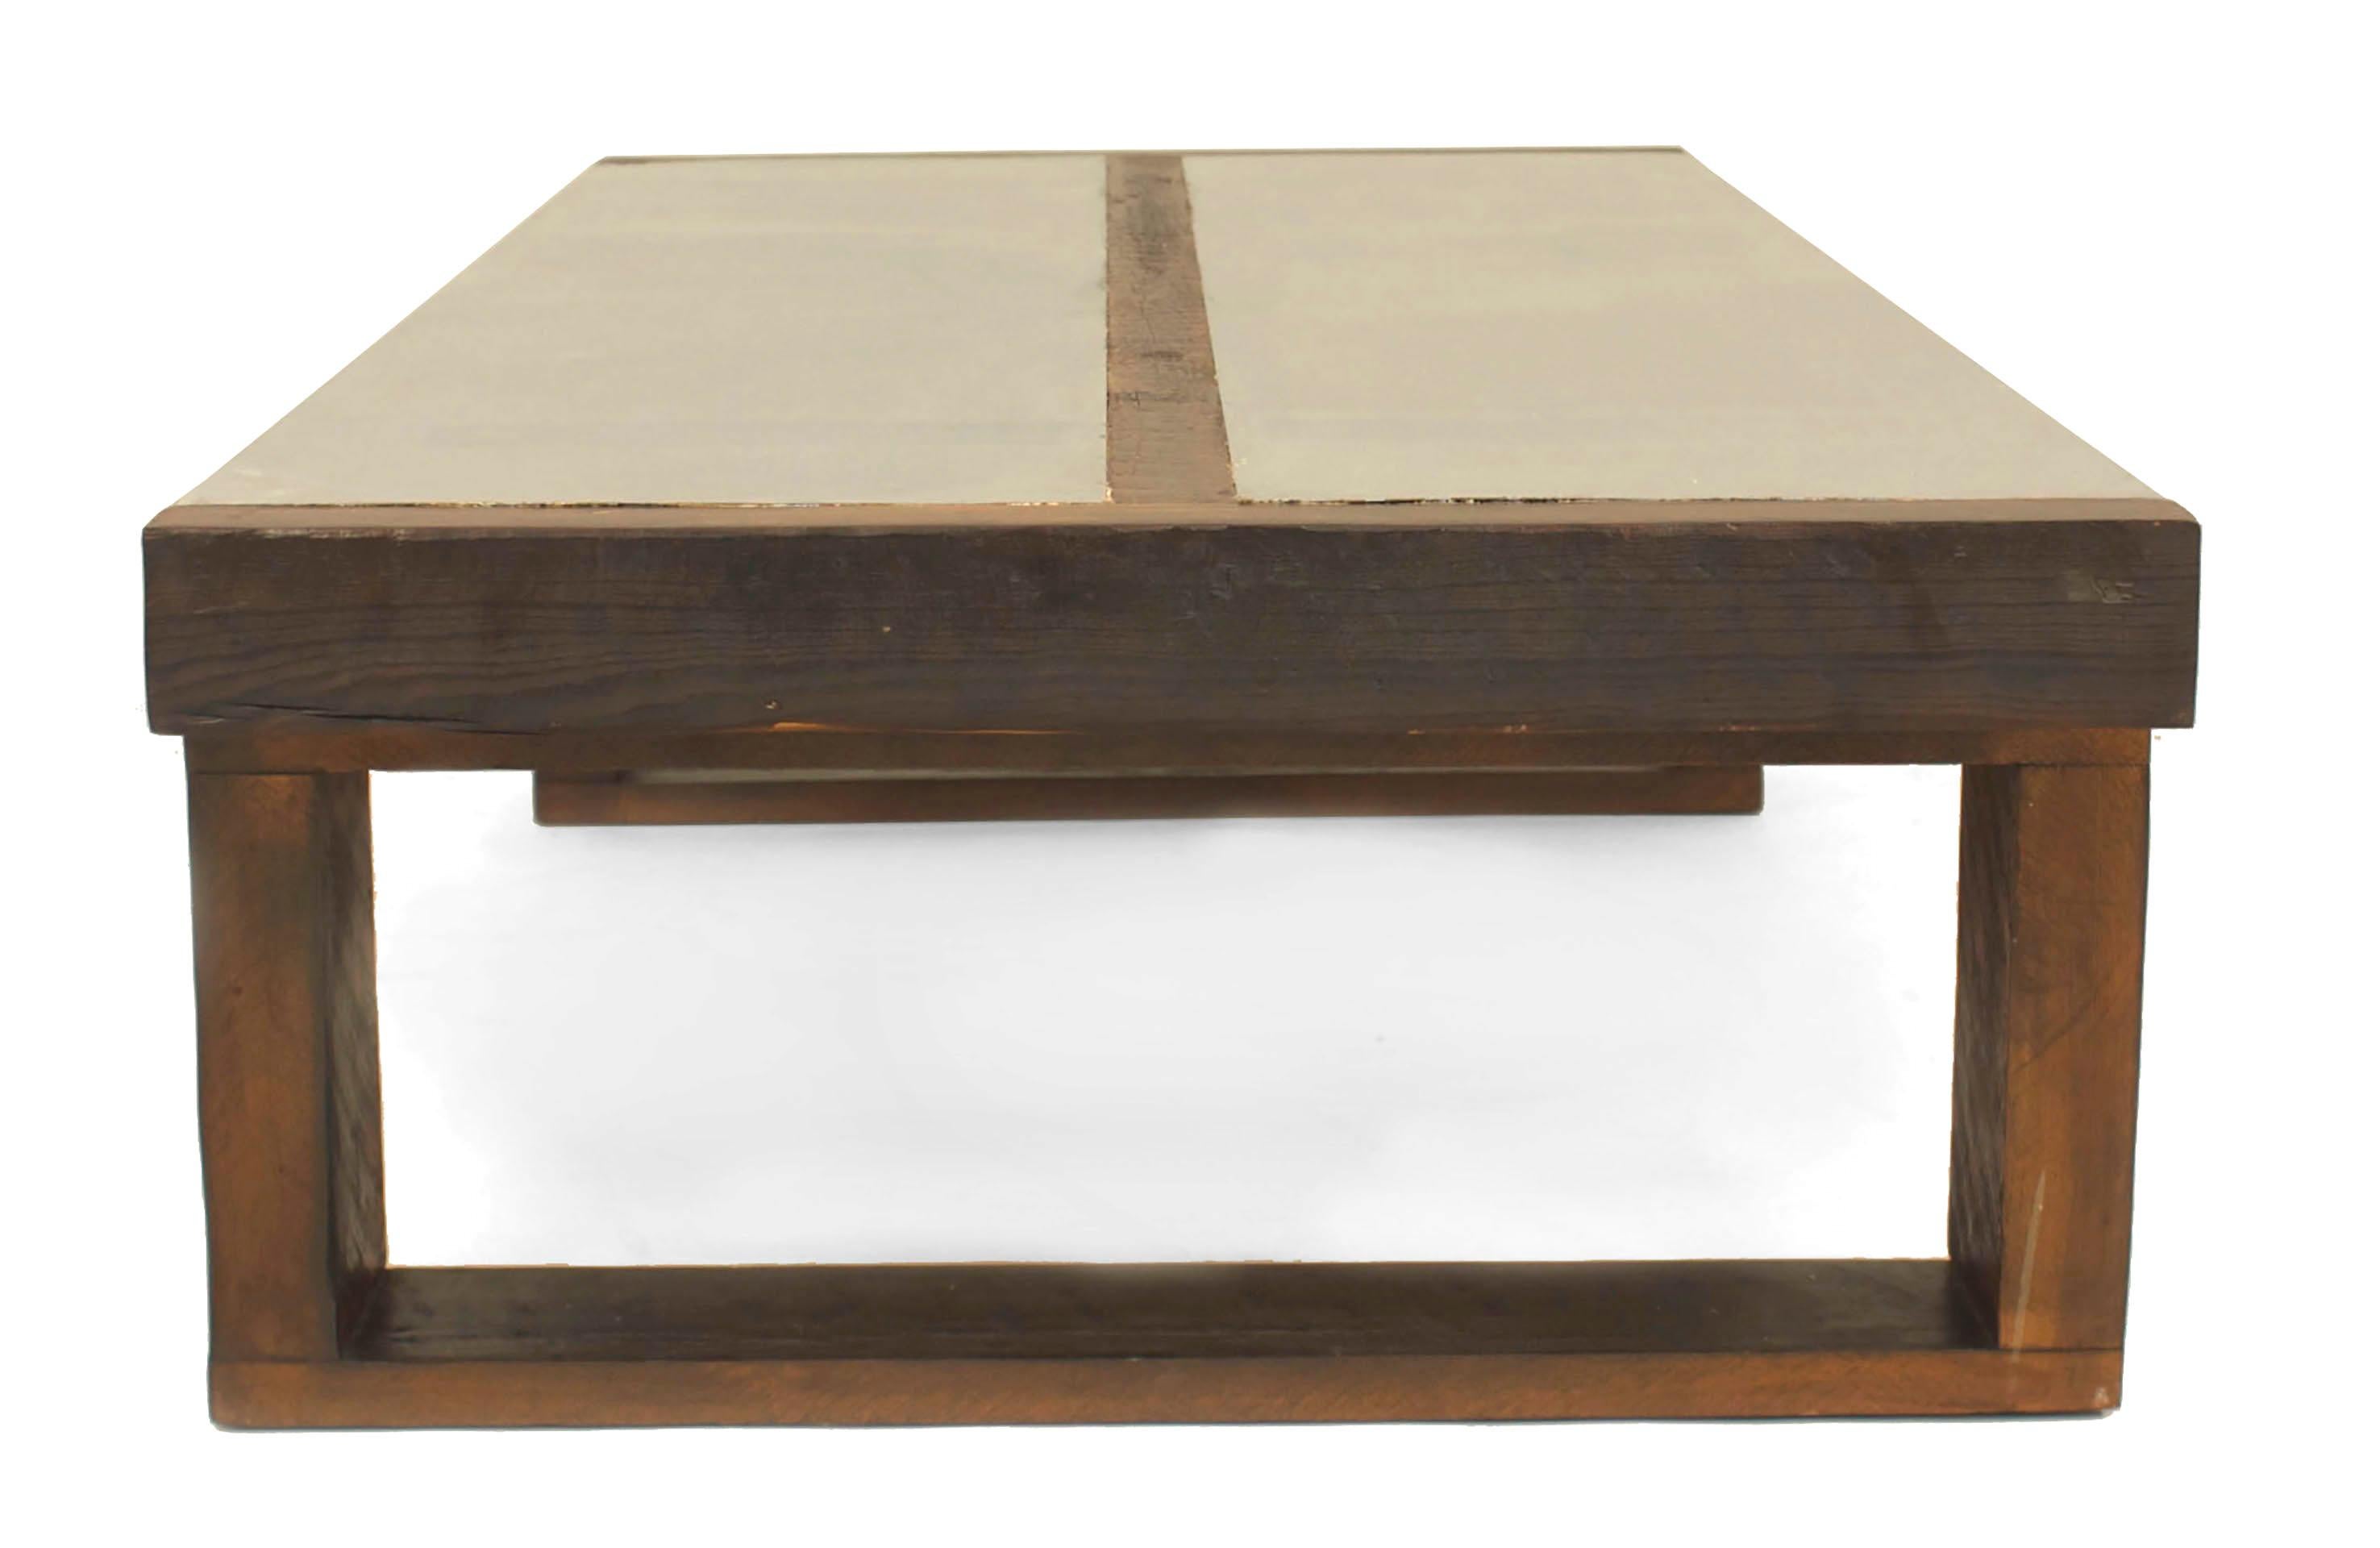 Stained Art Deco Modernist Style Oak and Metal Coffee Table For Sale